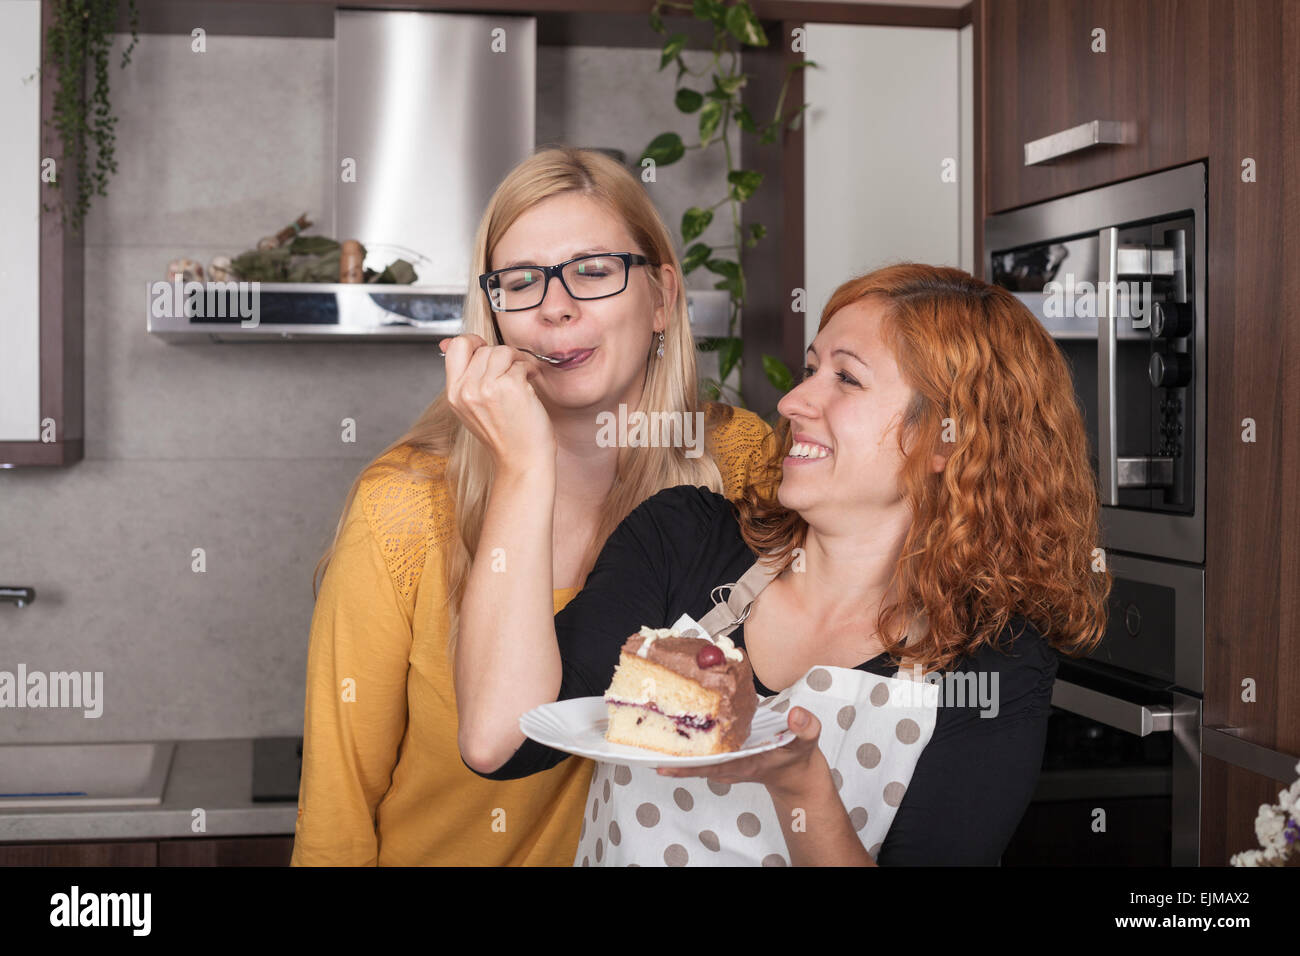 Delighted Girlfriends Enjoying Cake And Feeding Each Other In The